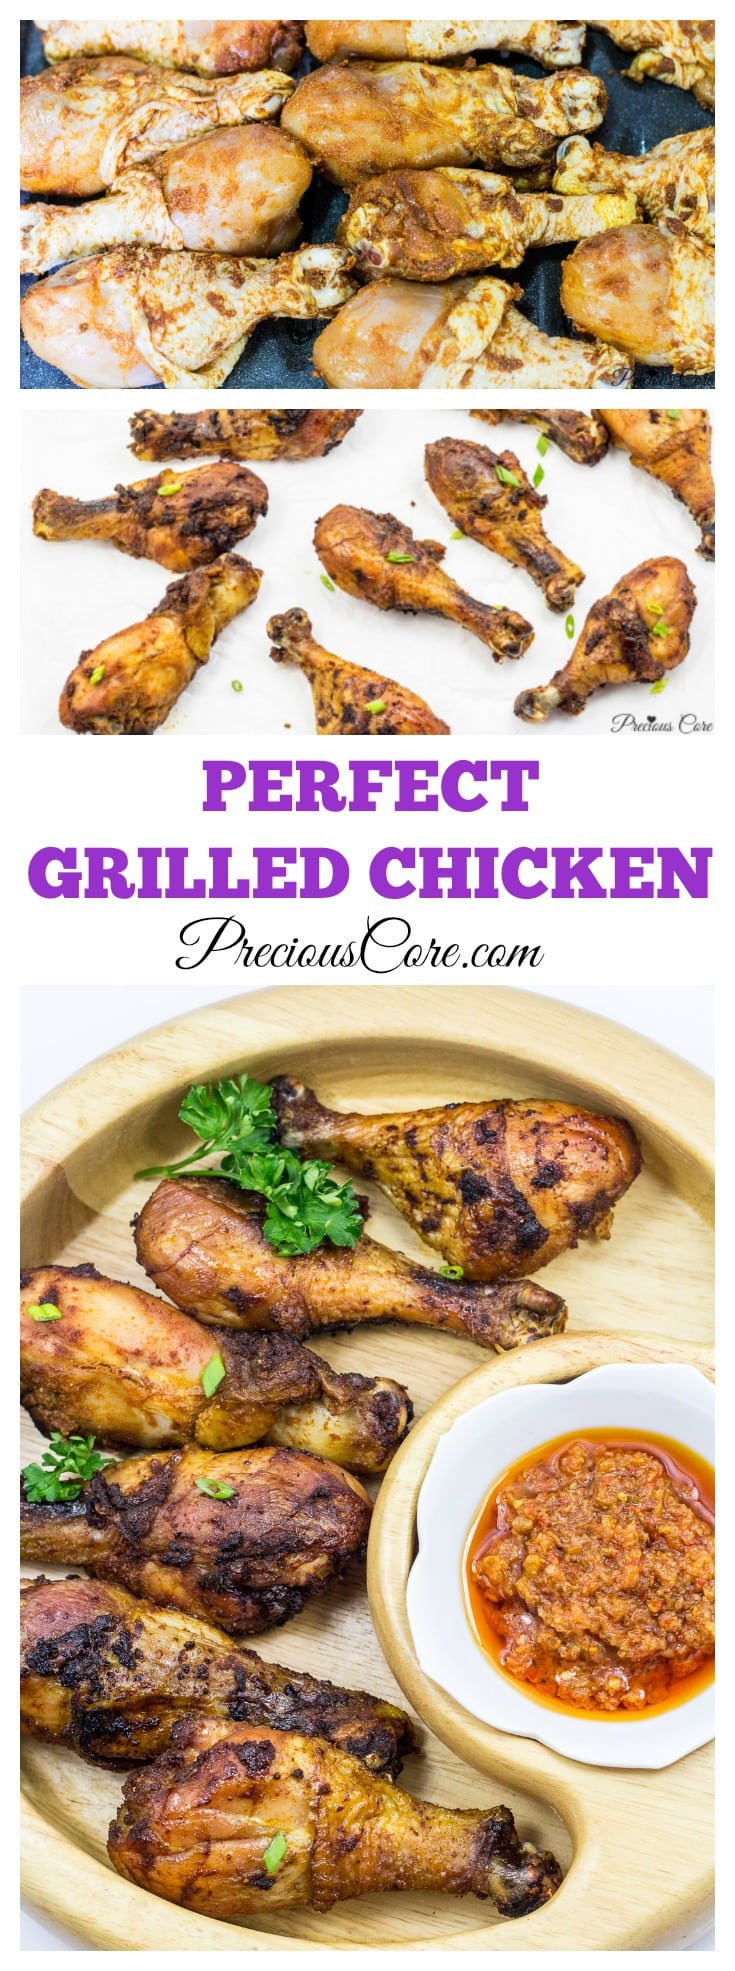 Perfect grilled chicken made in the oven - Precious Core